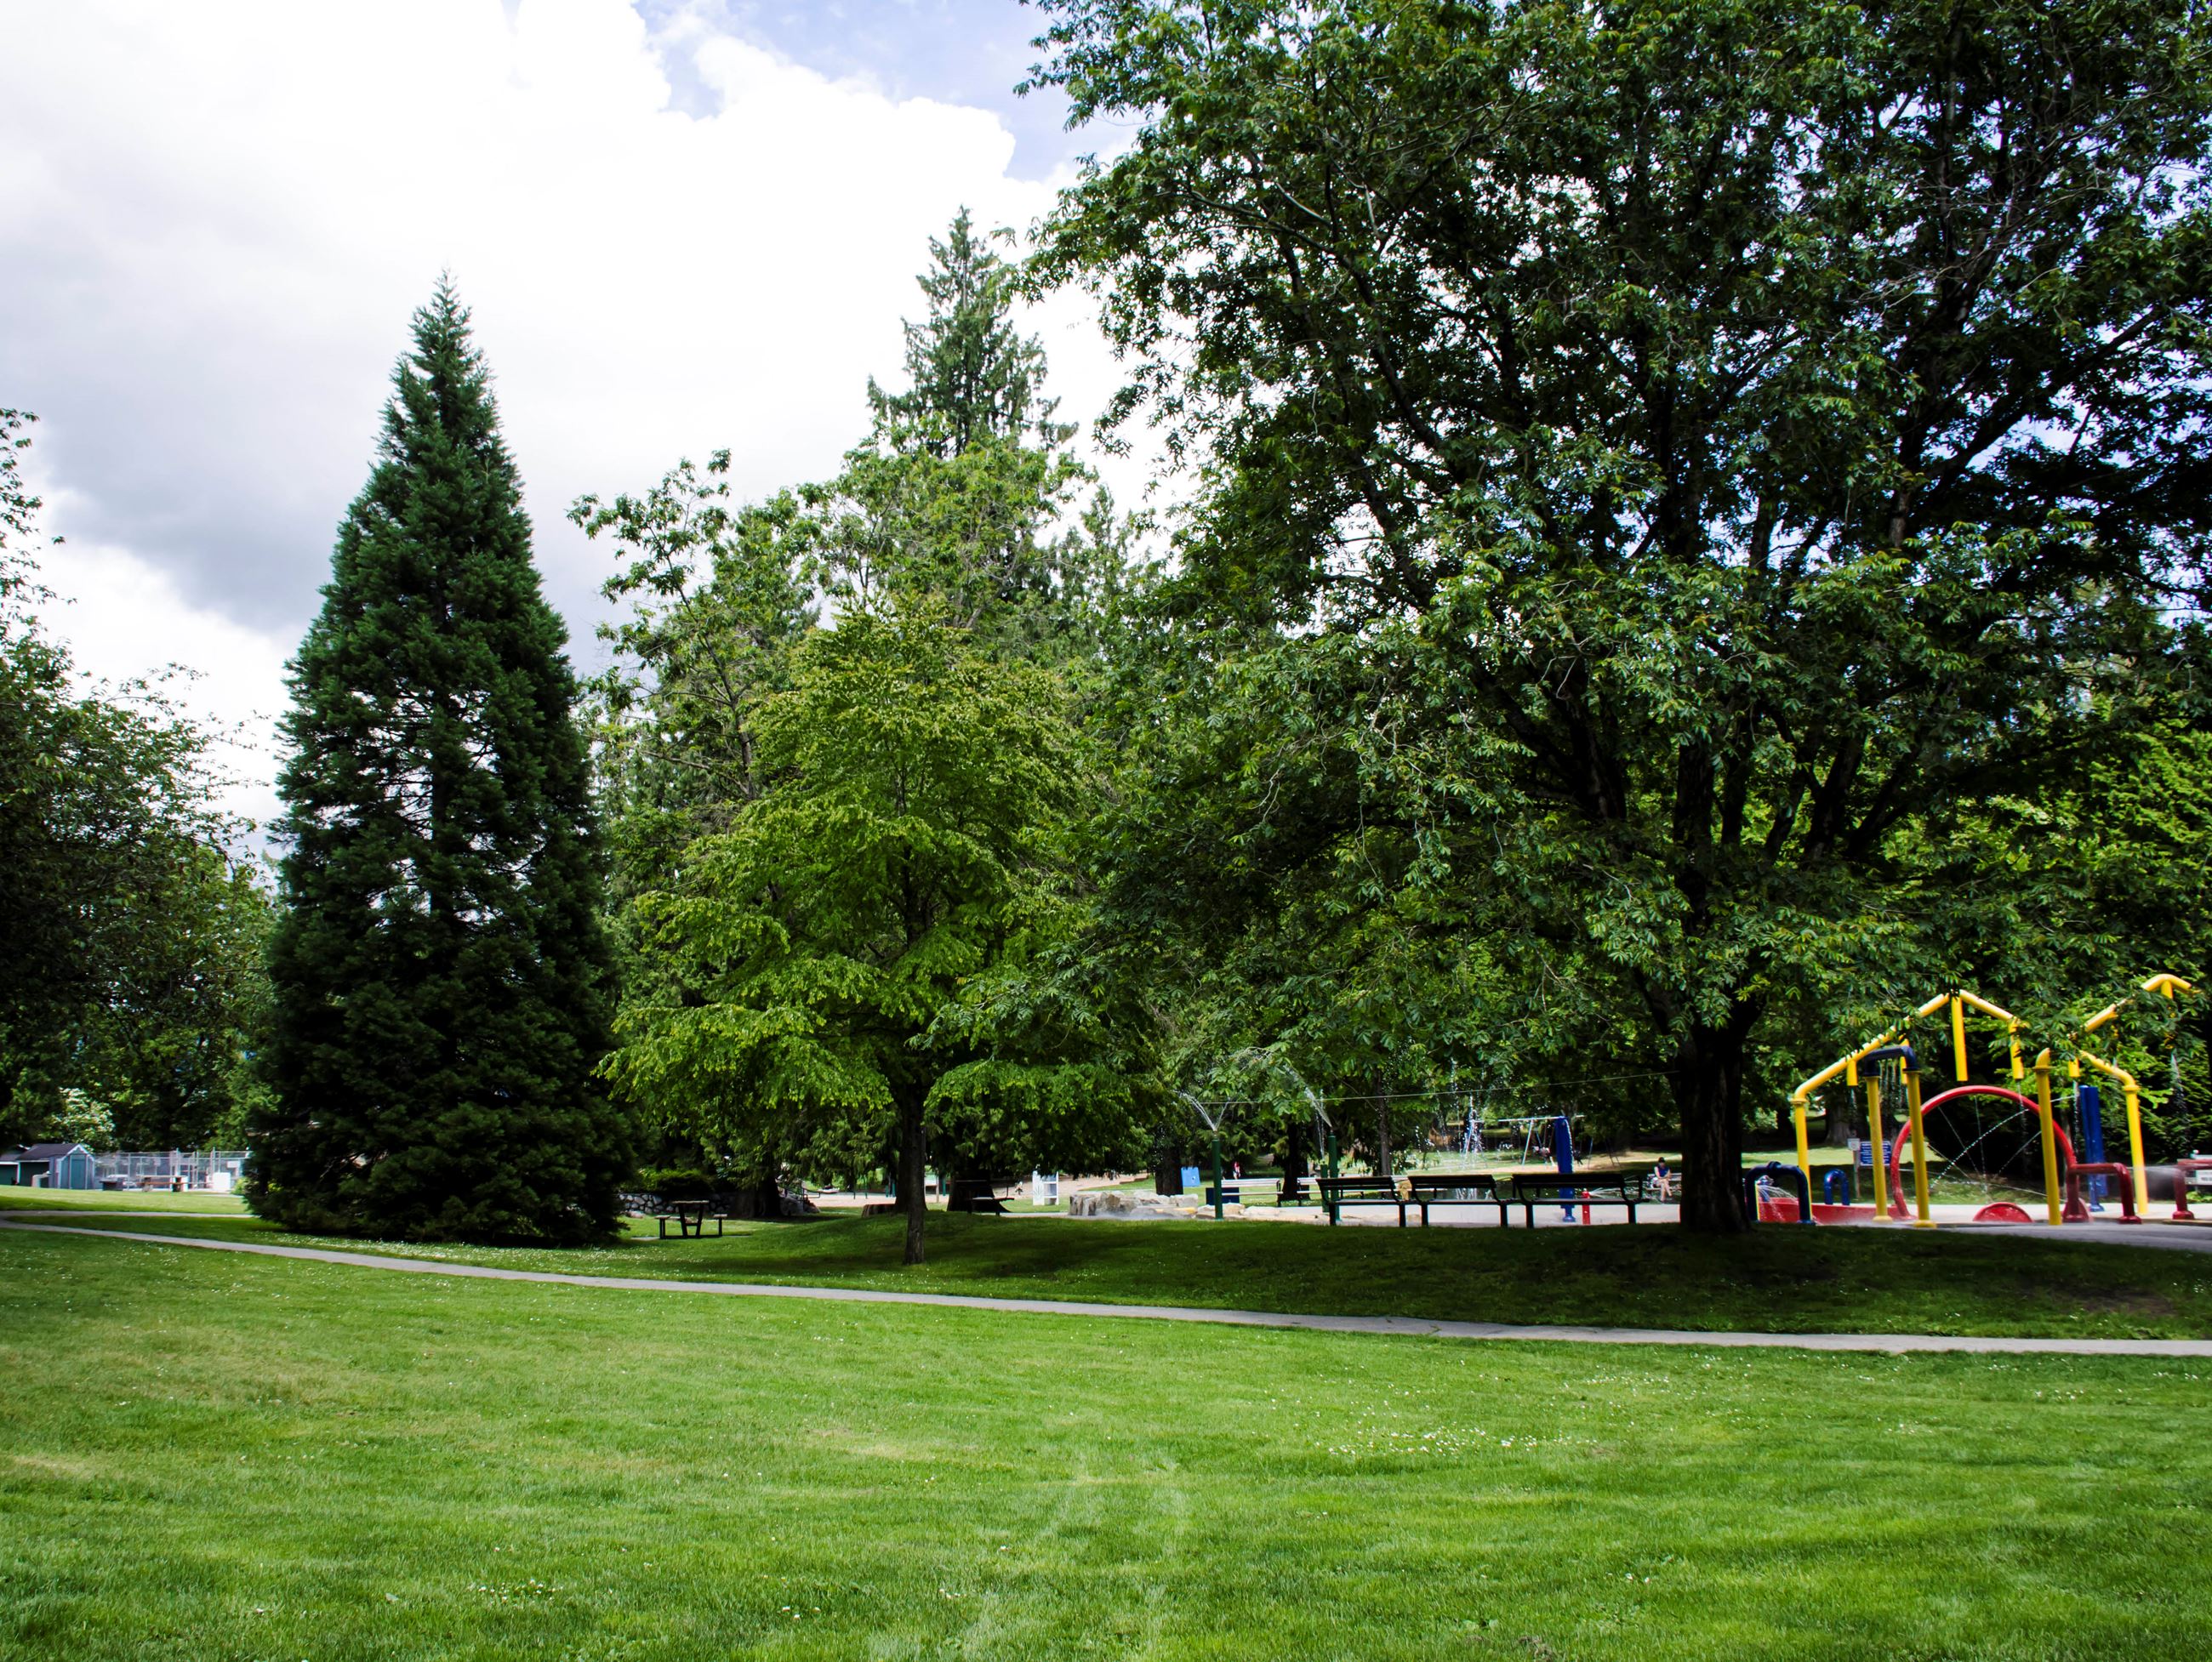 An image of Blue Mountain Park showing trees, the spray park and the wading pool